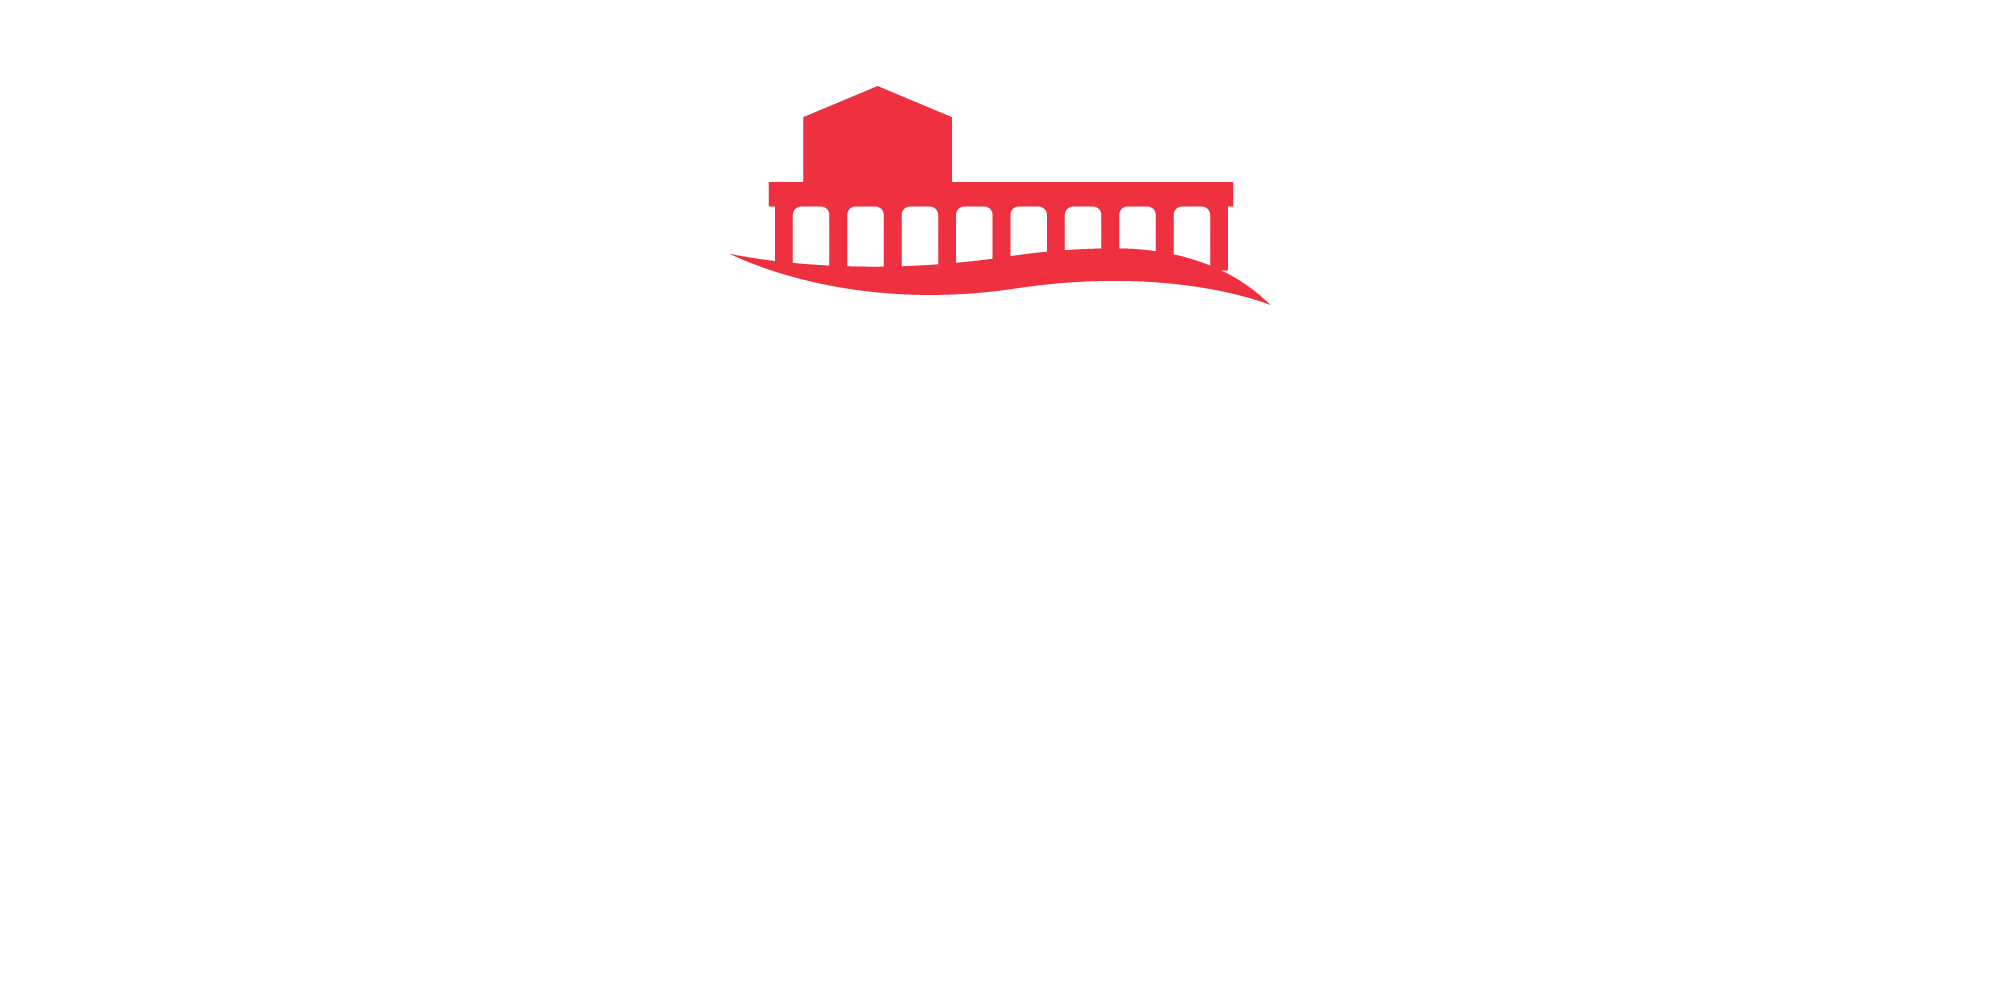 The Harrison Greenberg Foundation Roundhouse Beautification Project